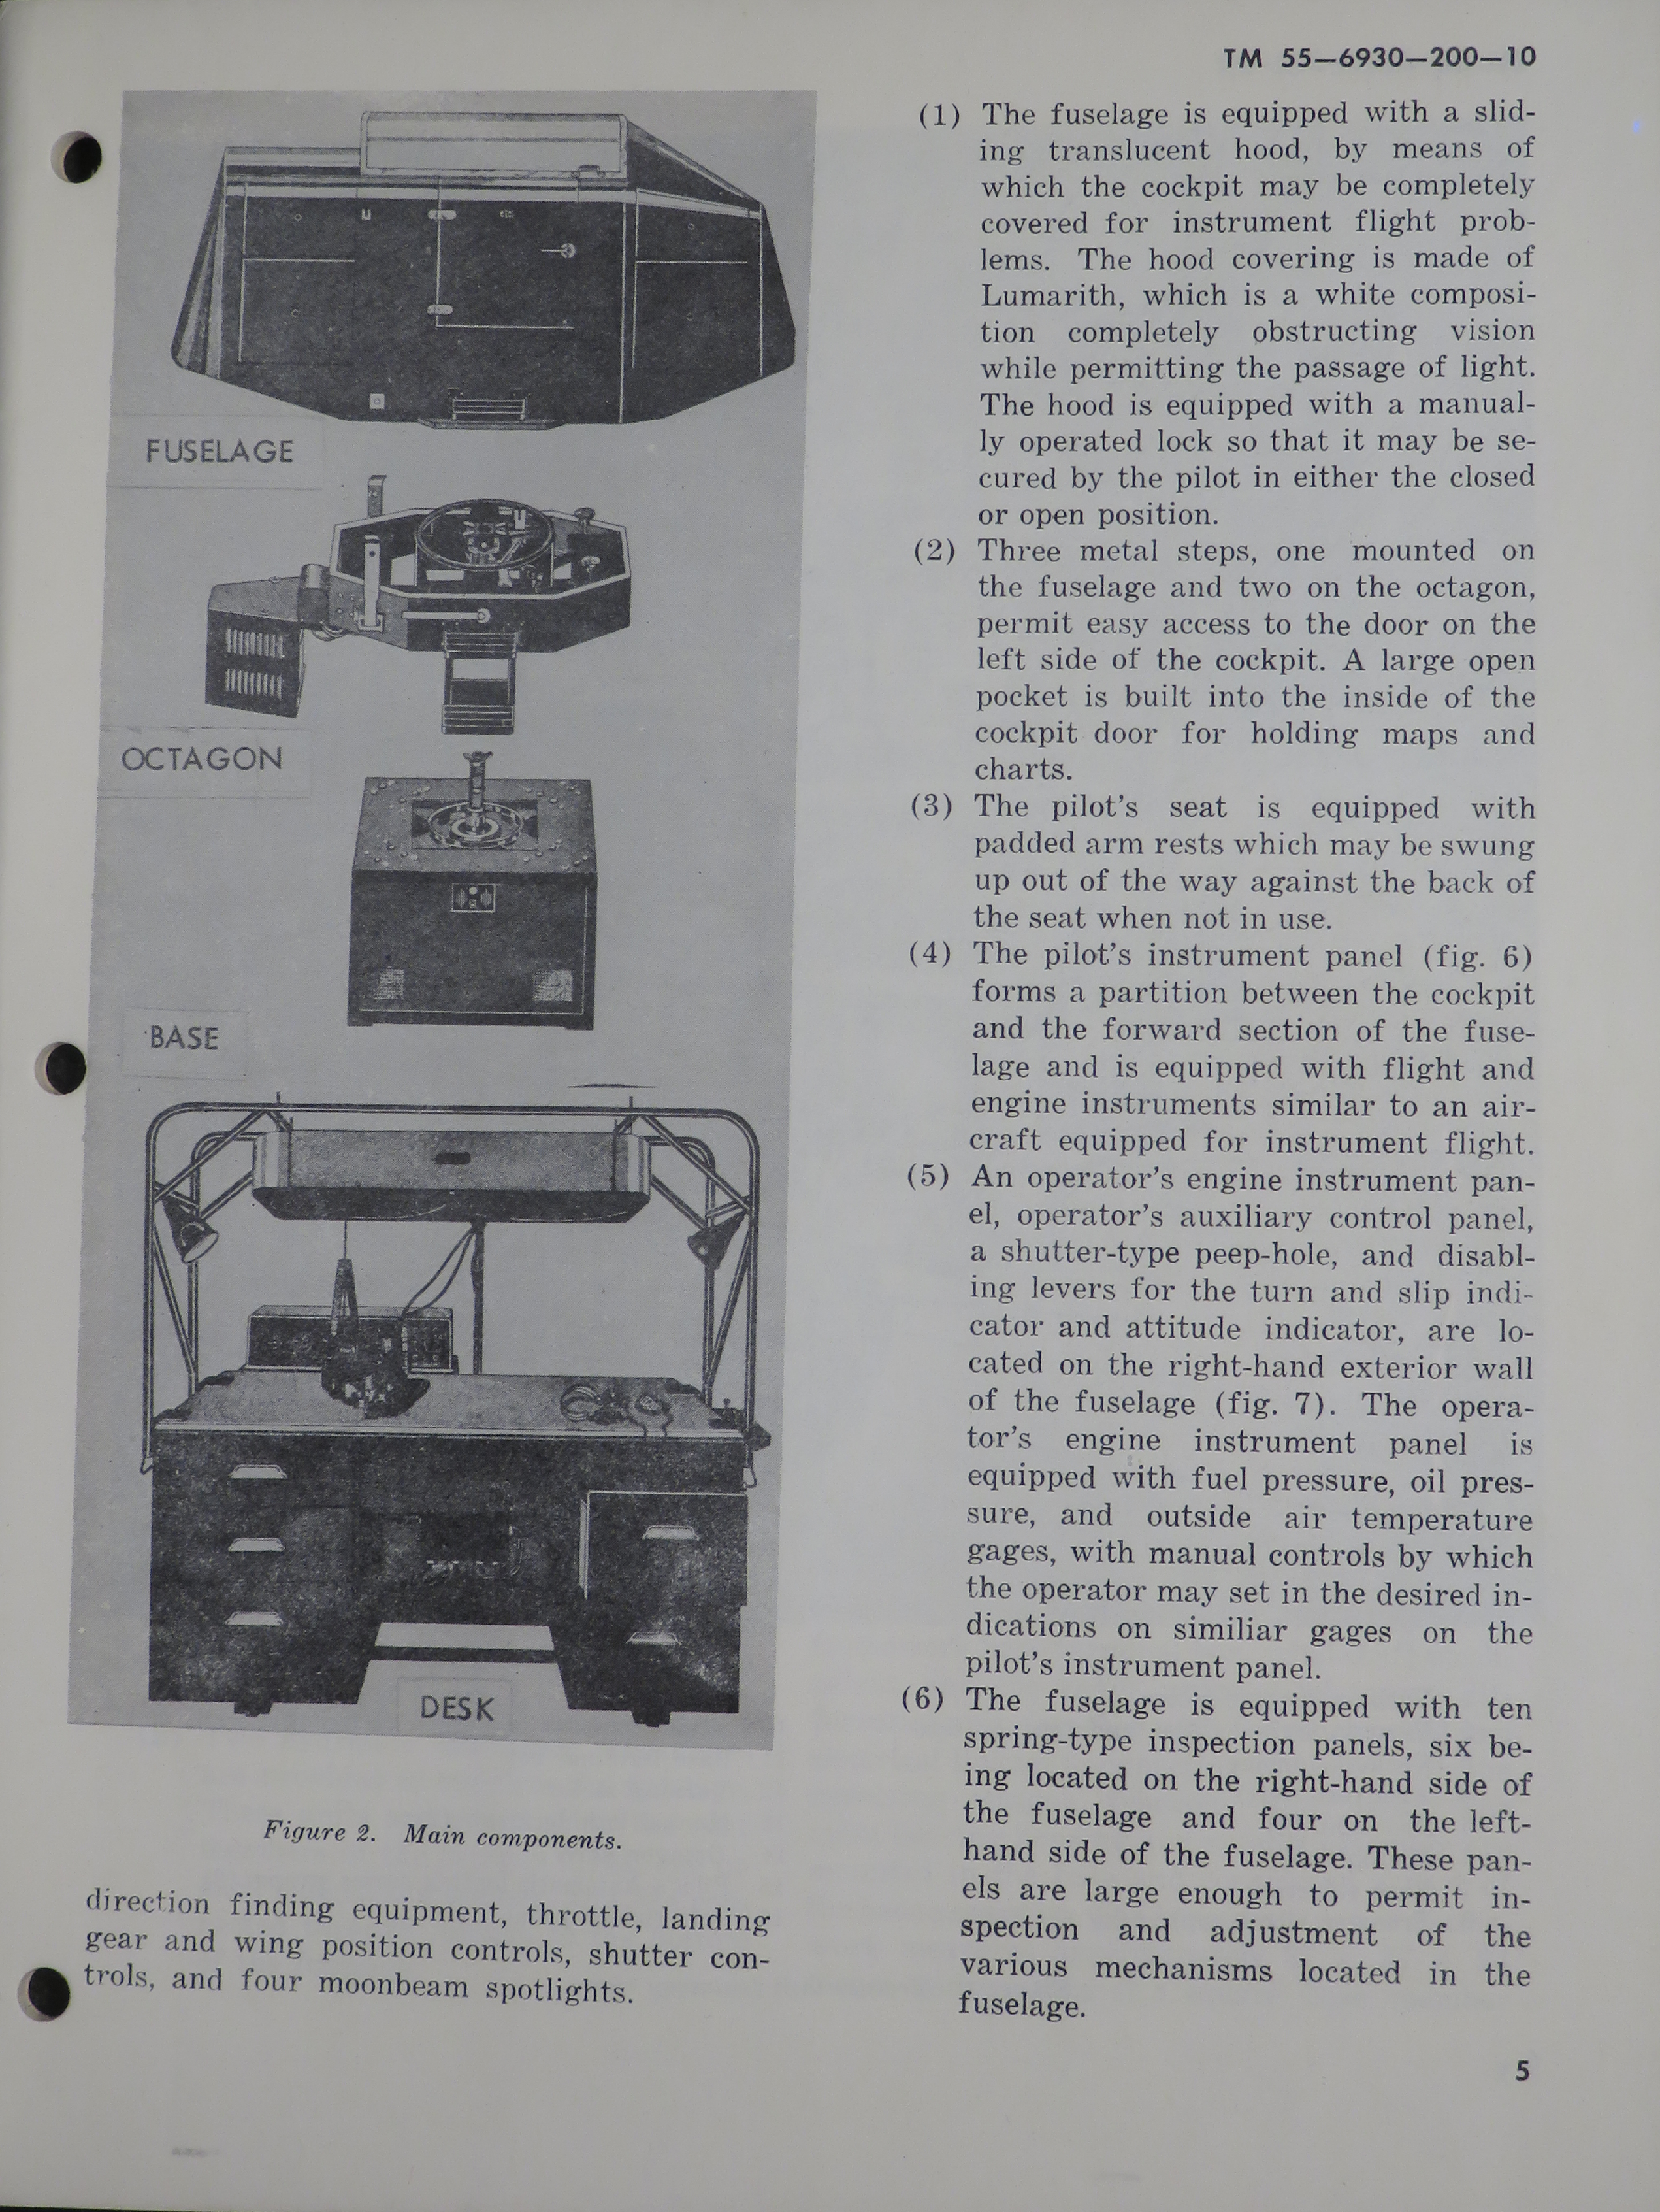 Sample page 5 from AirCorps Library document: Operator's Manual for Basic Instrument Trainer 45 Device 1-CA-1